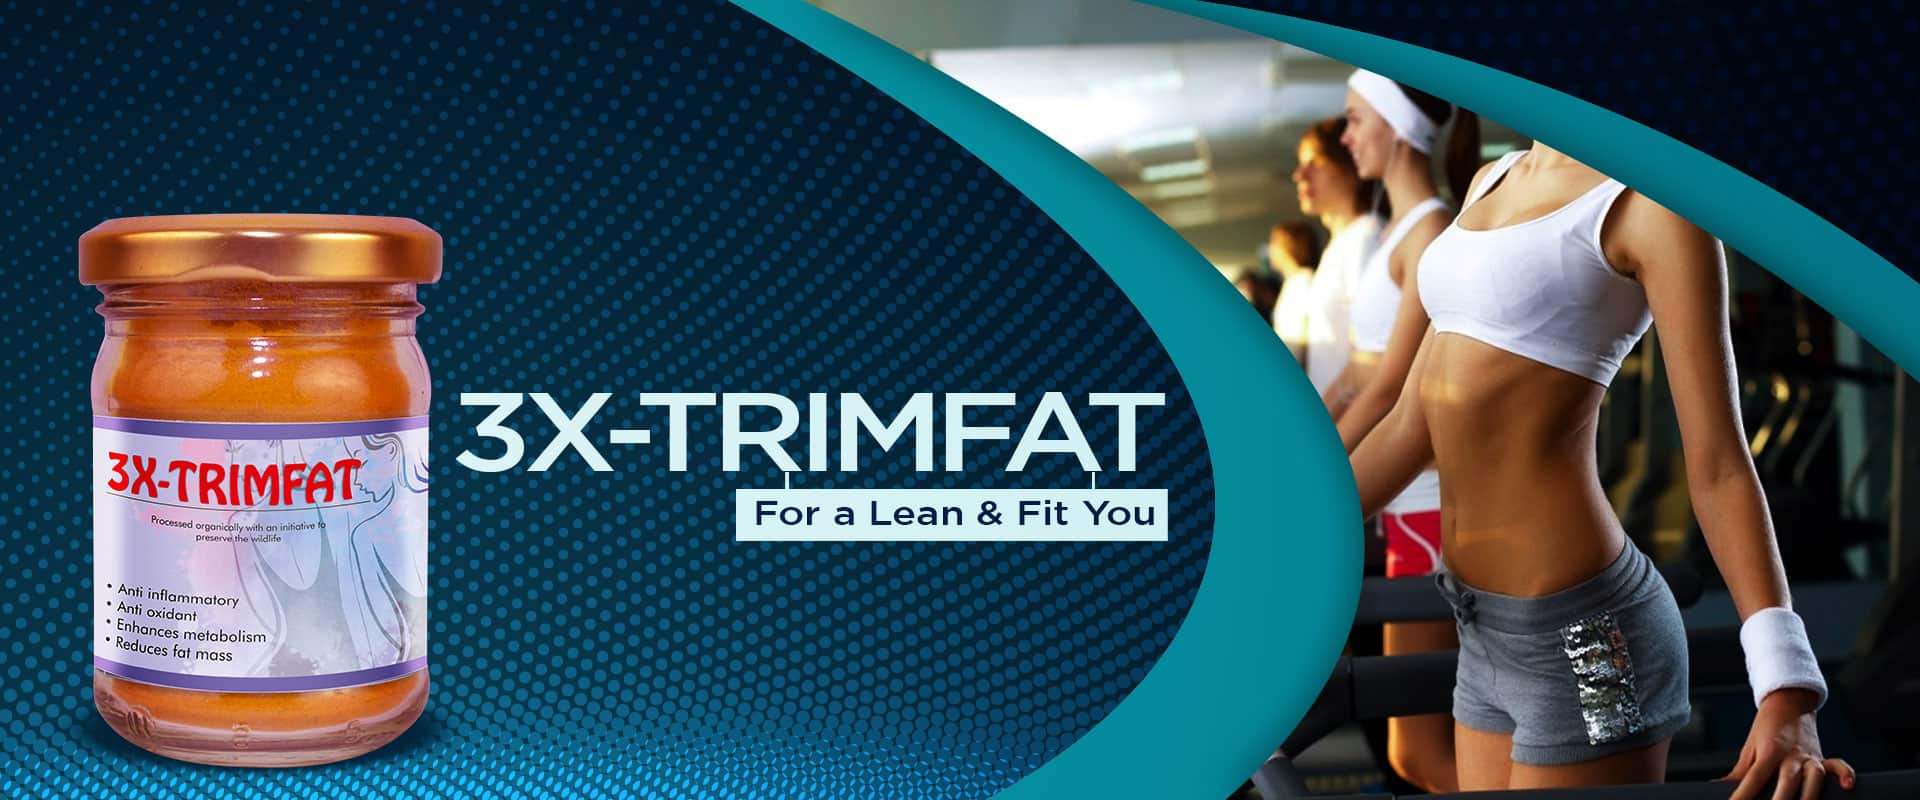 a bottle of "TrimFat-3X" dietary supplement, featuring a sleek and modern design with a clear label displaying the product name and key information. The bottle is shown against a clean white background, with a fresh green leafy plant in the background, suggesting the health benefits of the supplement